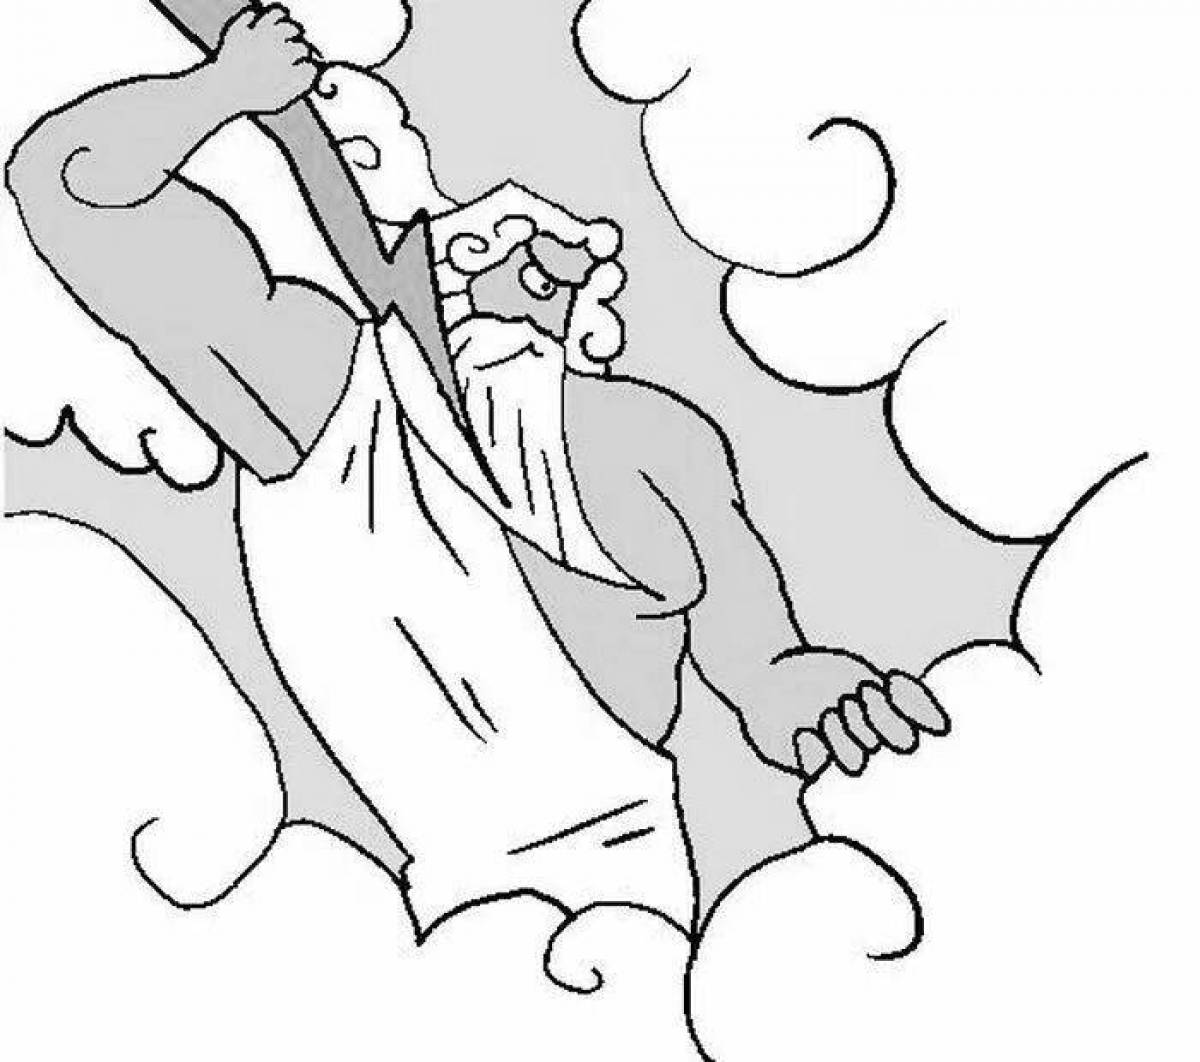 Glowing coloring book of the god Zeus